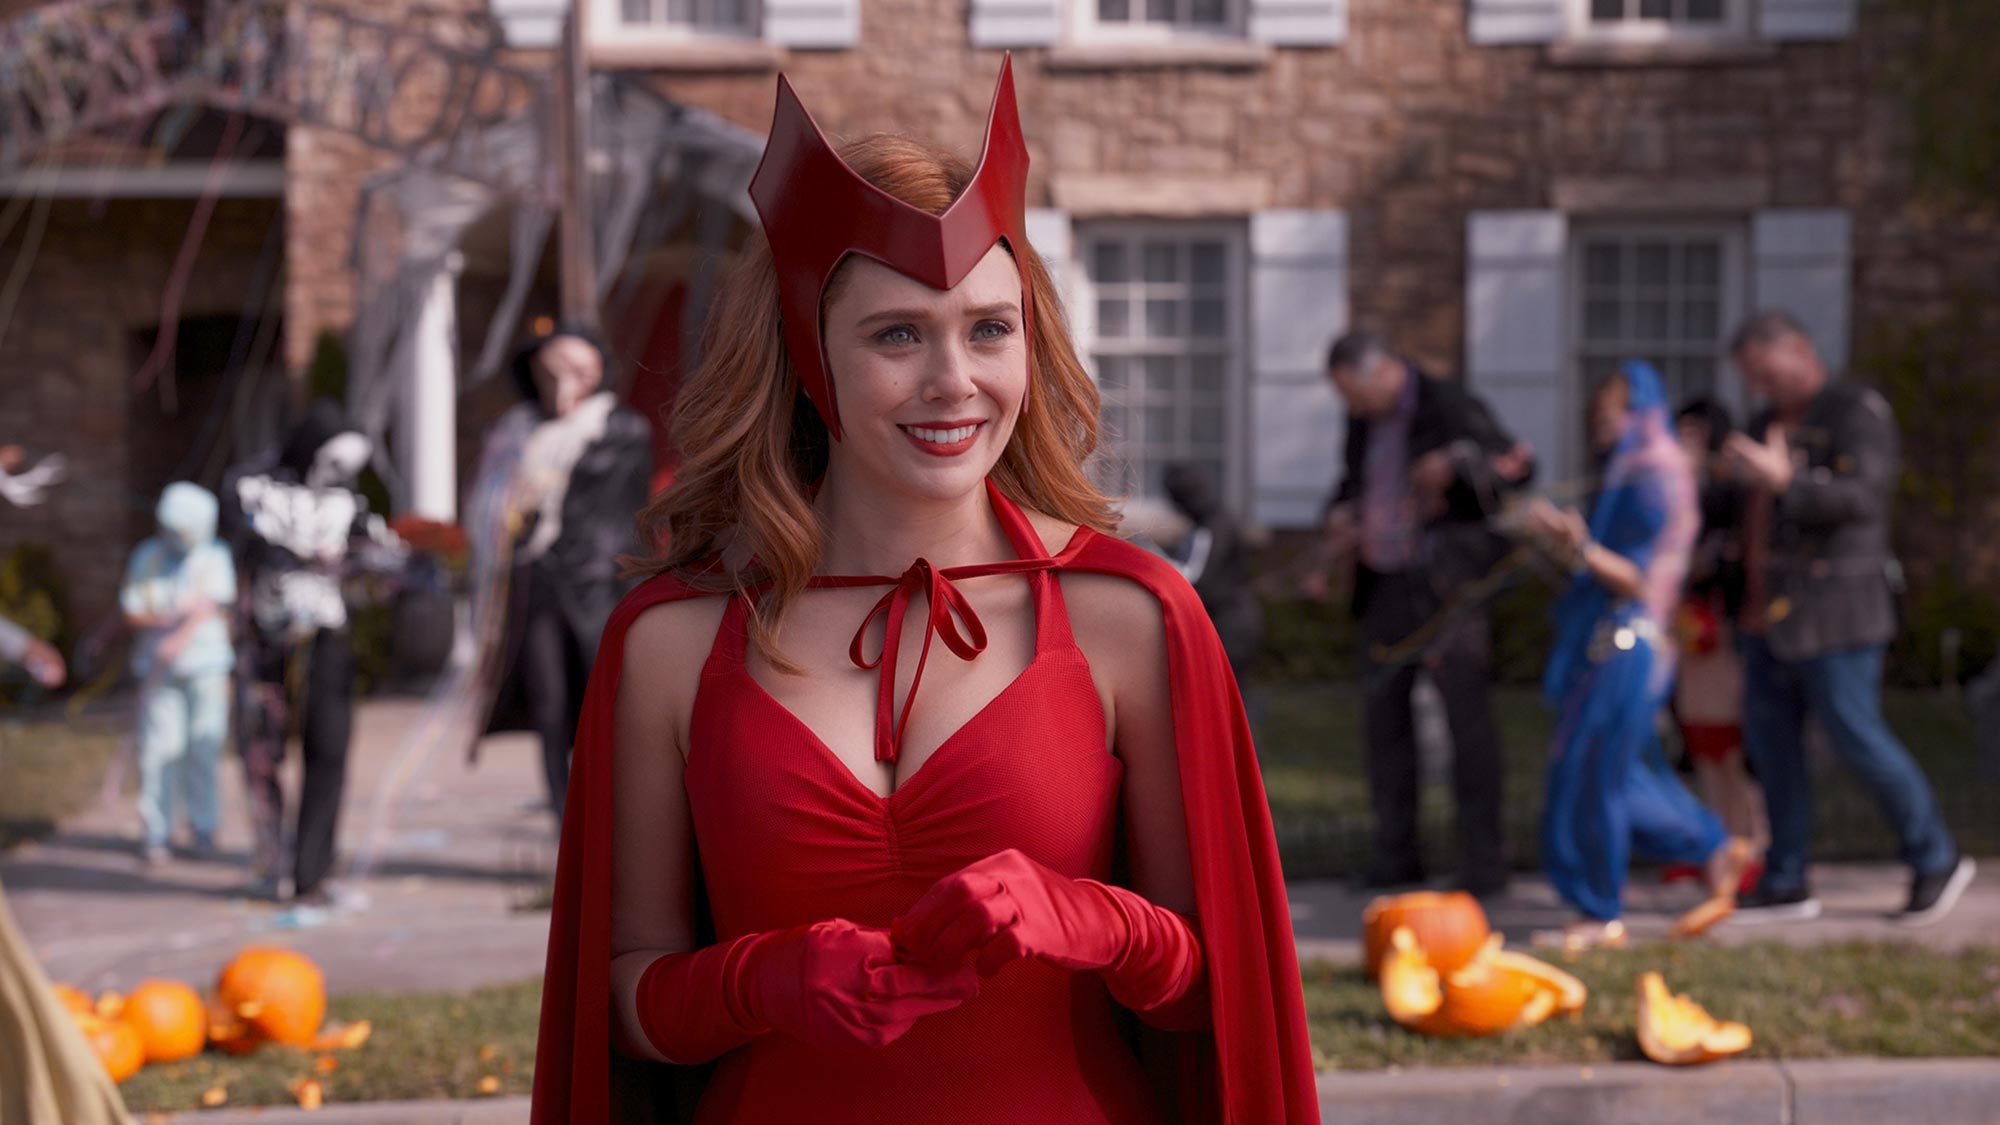 Scarlet Witch Costume